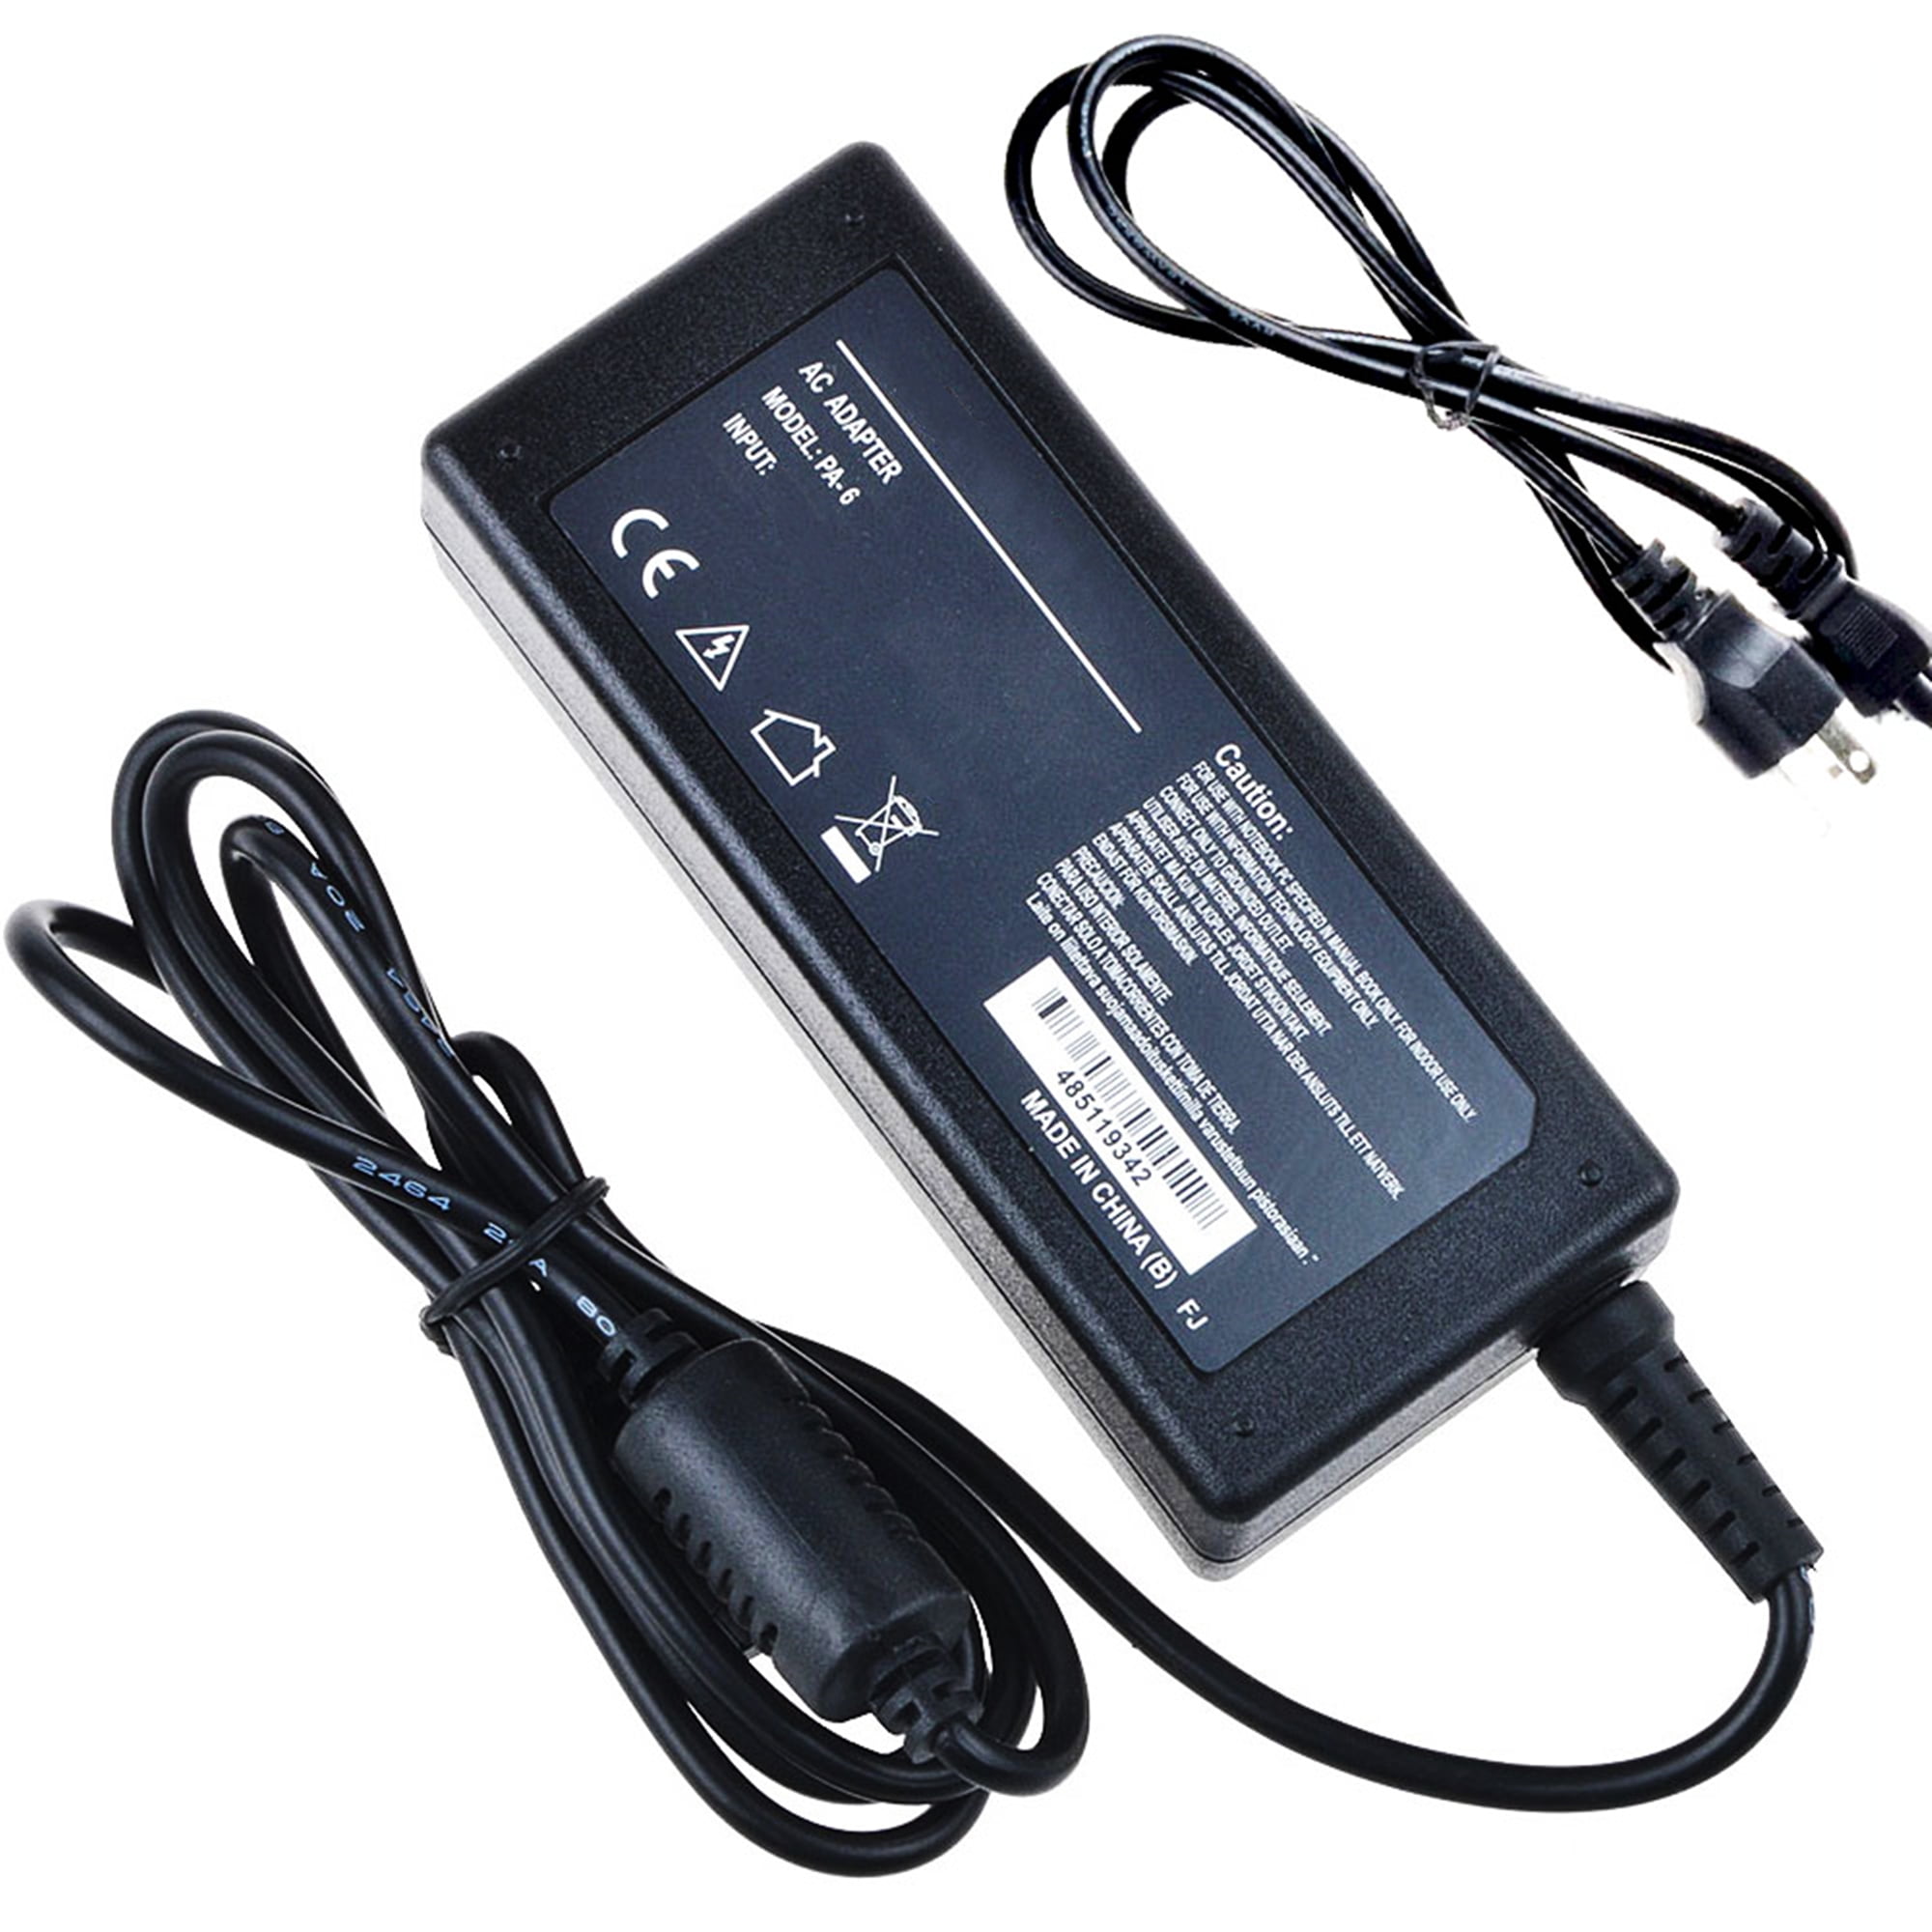 AC Adapter For Kodak ESP 5200 ESP 5260 All-in-One Printer 1K5831 Charger Power 